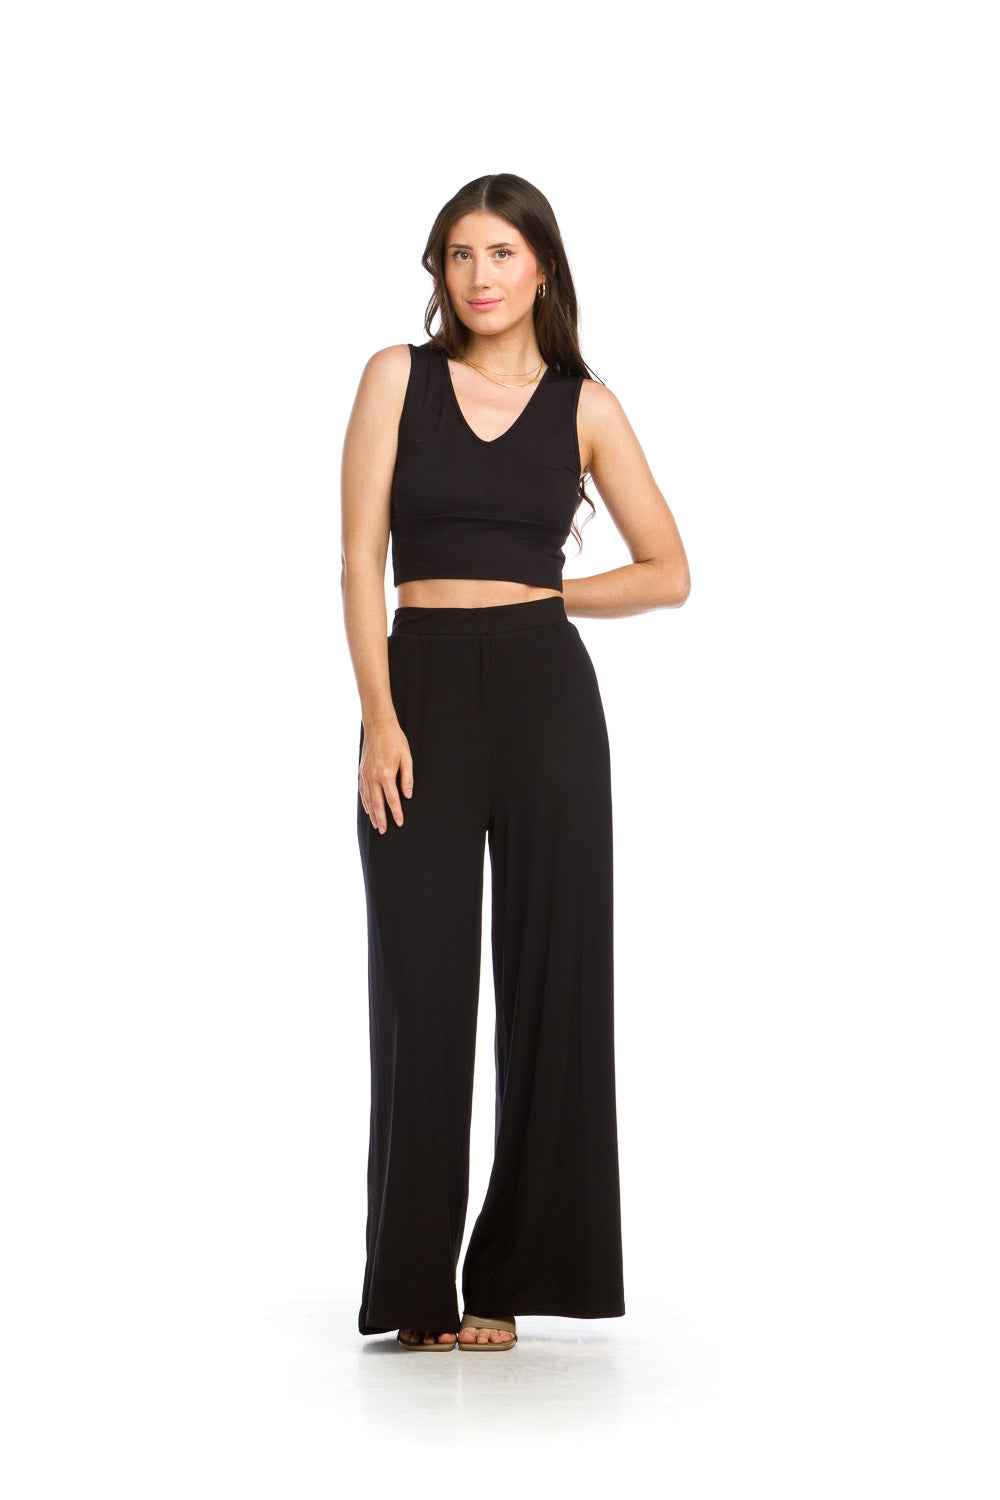 PP-16842 - HIGH WAISTED RIBBED WIDE LEG PANTS